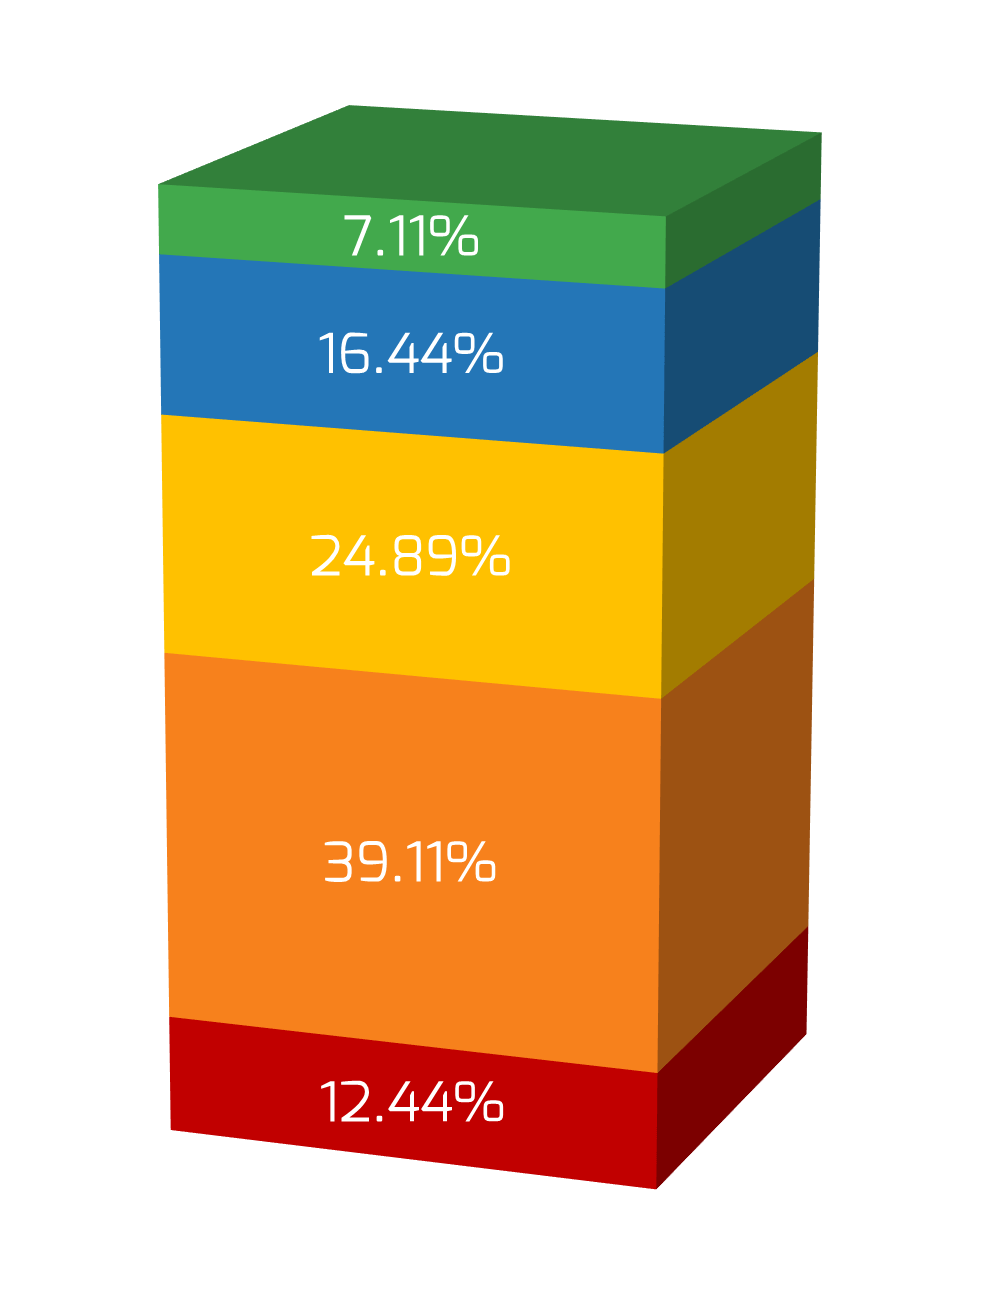 Stacked bar chart measuring percentage of survey respondents by IT maturity level. Innovator is 7.11%, Business Partner is 16.44%, Trusted Operator is 24.89%, Firefighter is 39.11%, and Unstable is 12.44%.